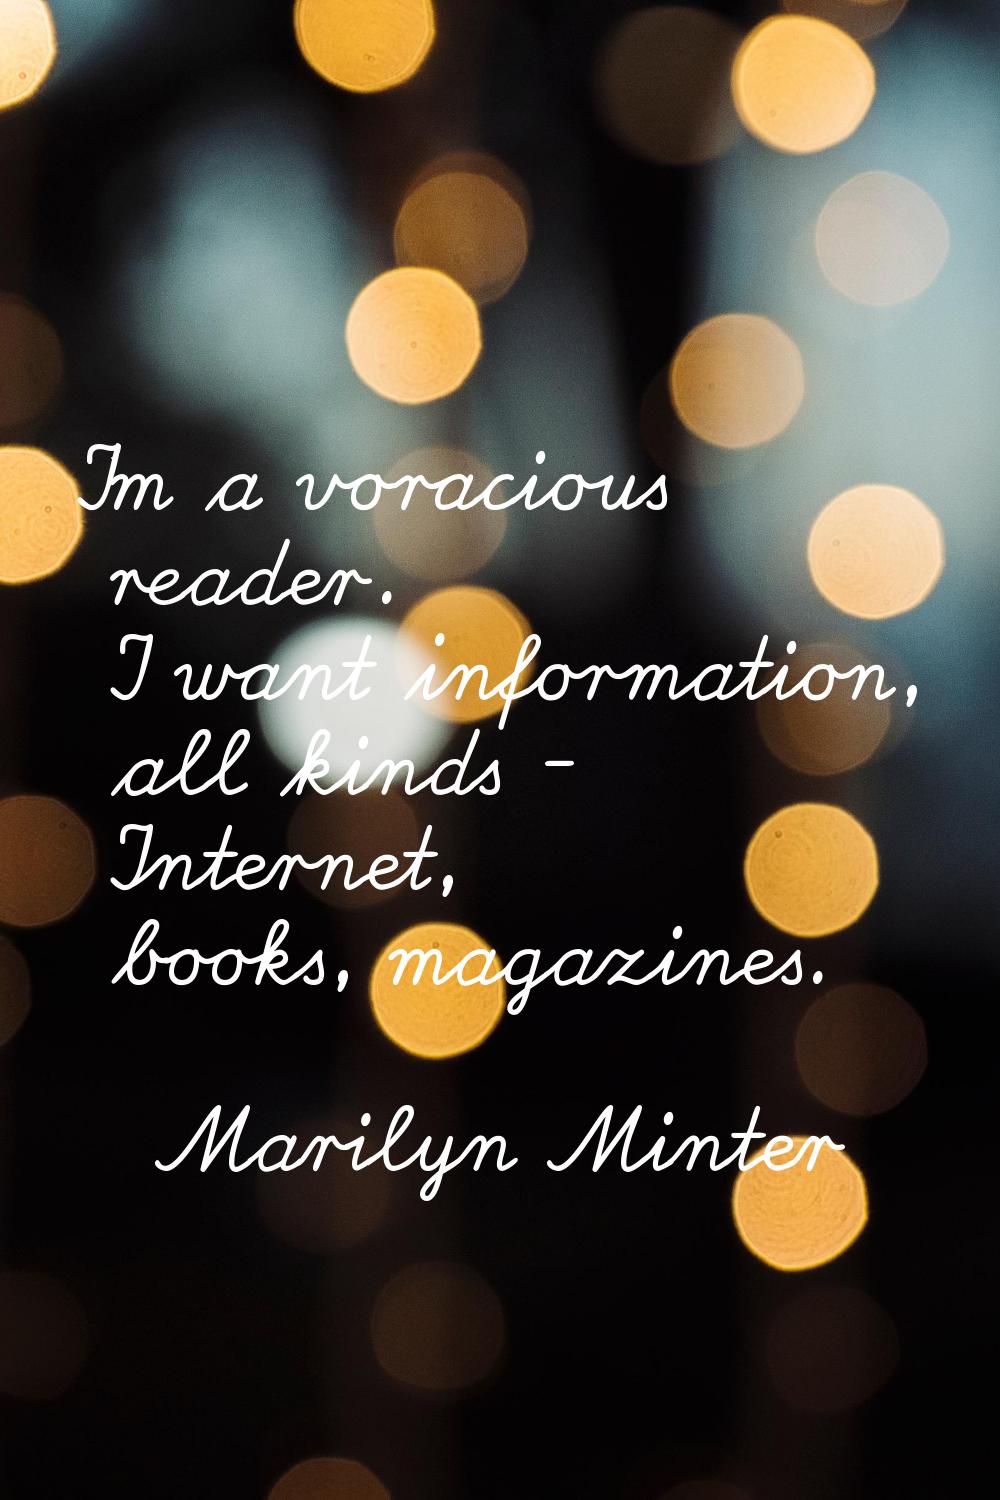 I'm a voracious reader. I want information, all kinds - Internet, books, magazines.